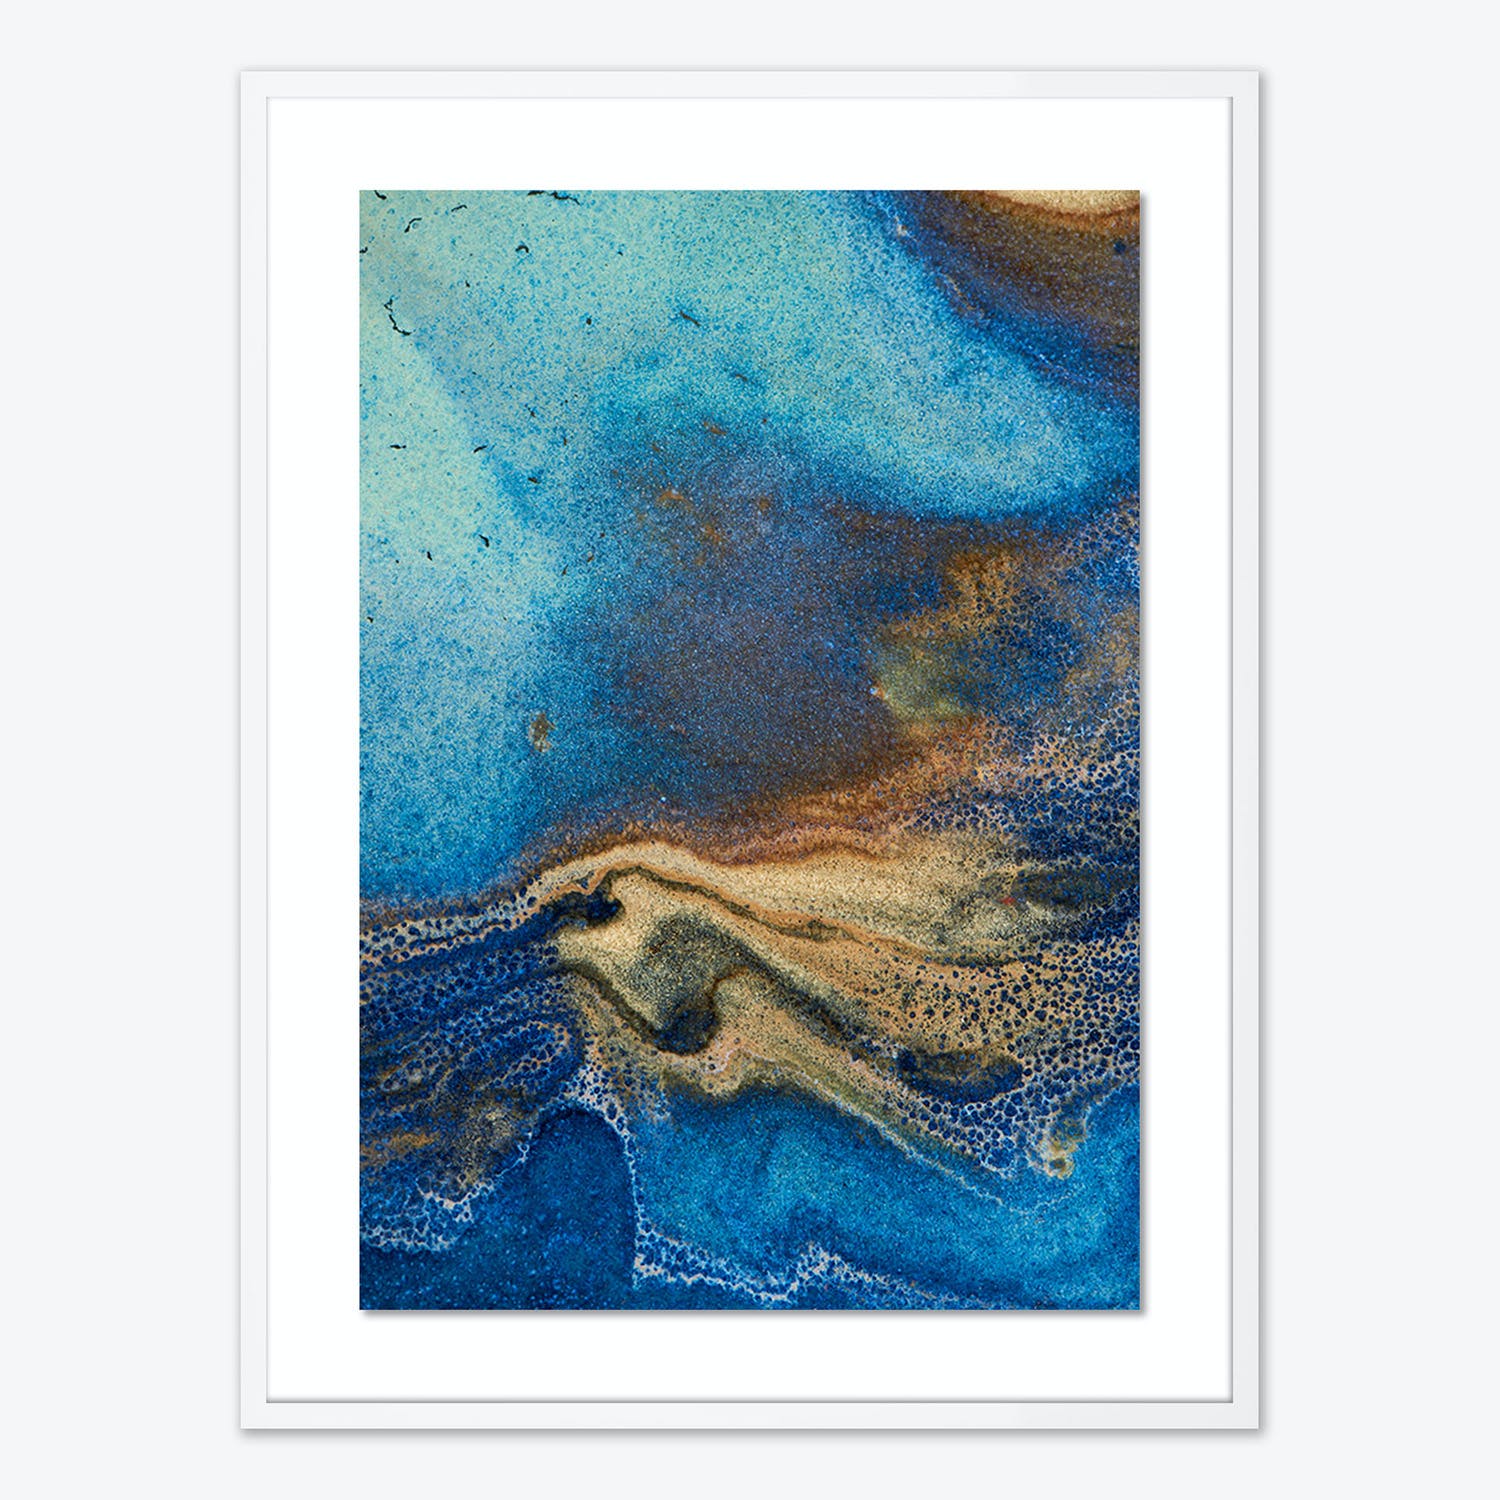 Abstract art with blue and golden-brown tones evokes coastal landscapes.